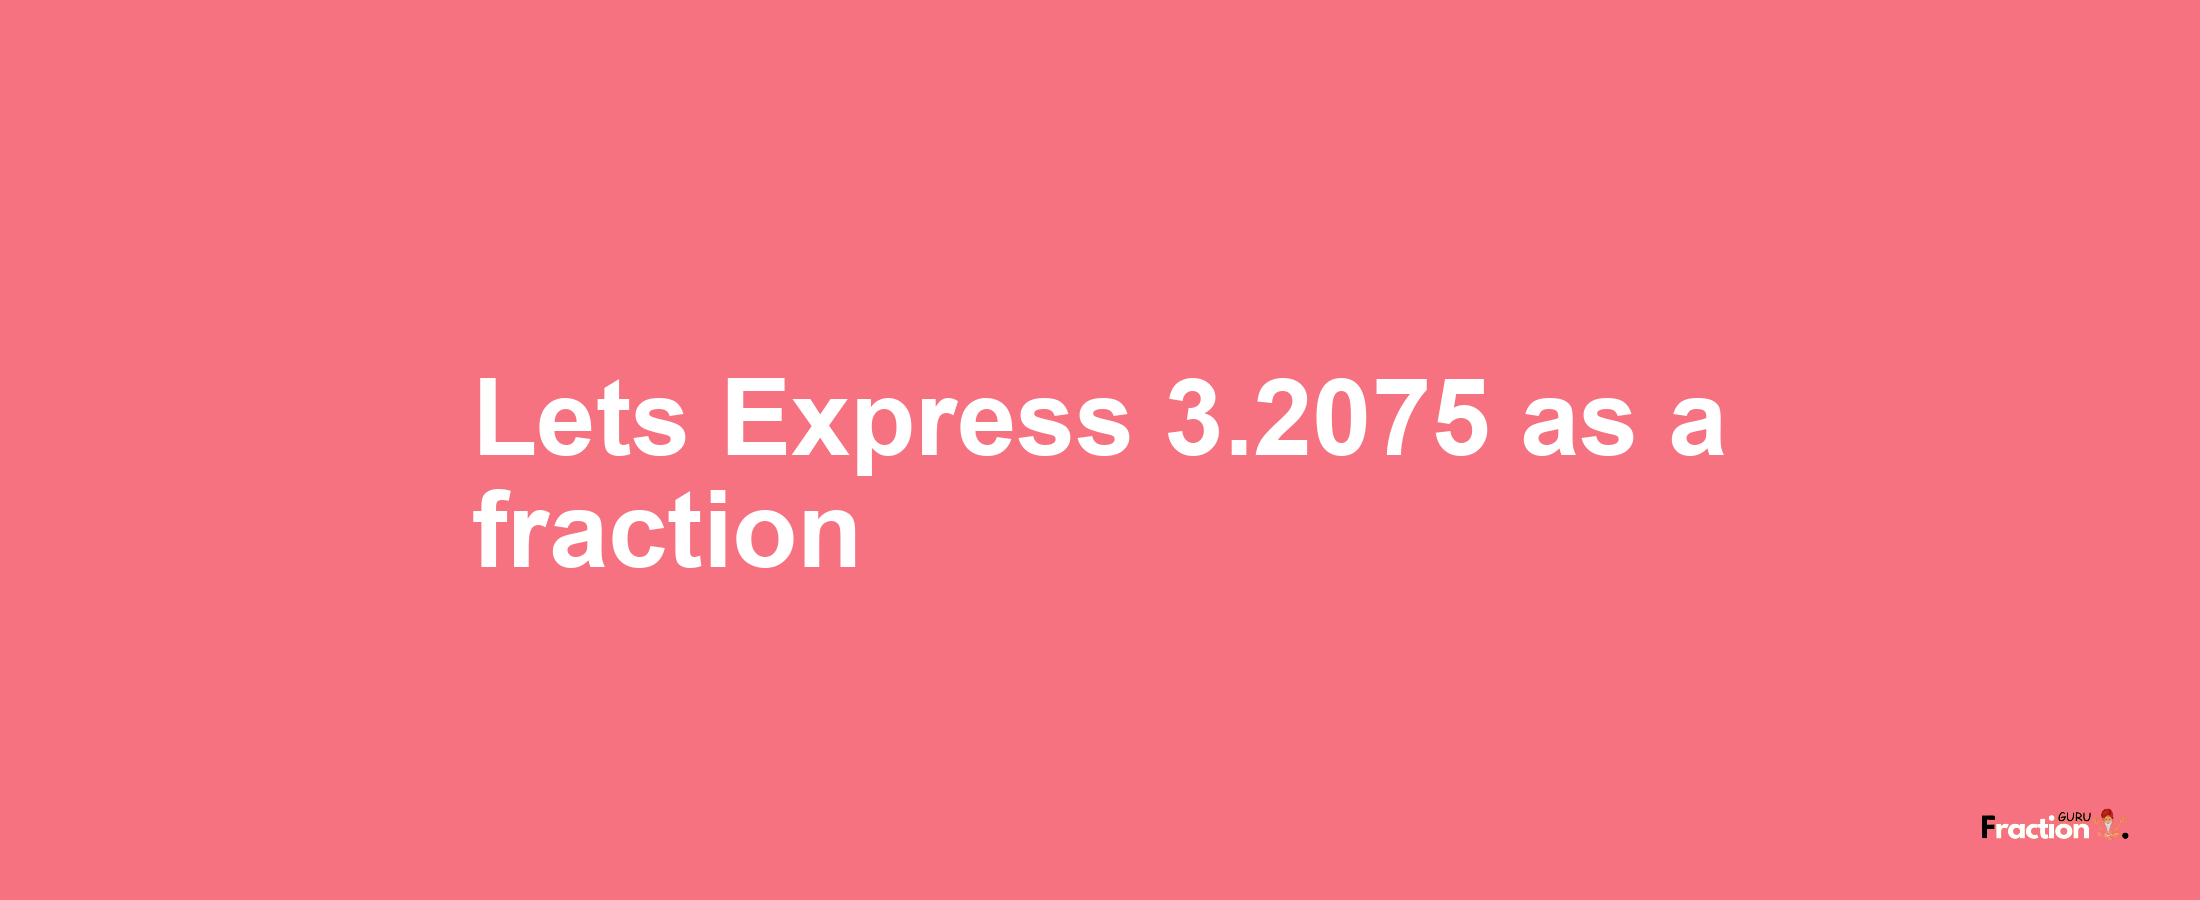 Lets Express 3.2075 as afraction